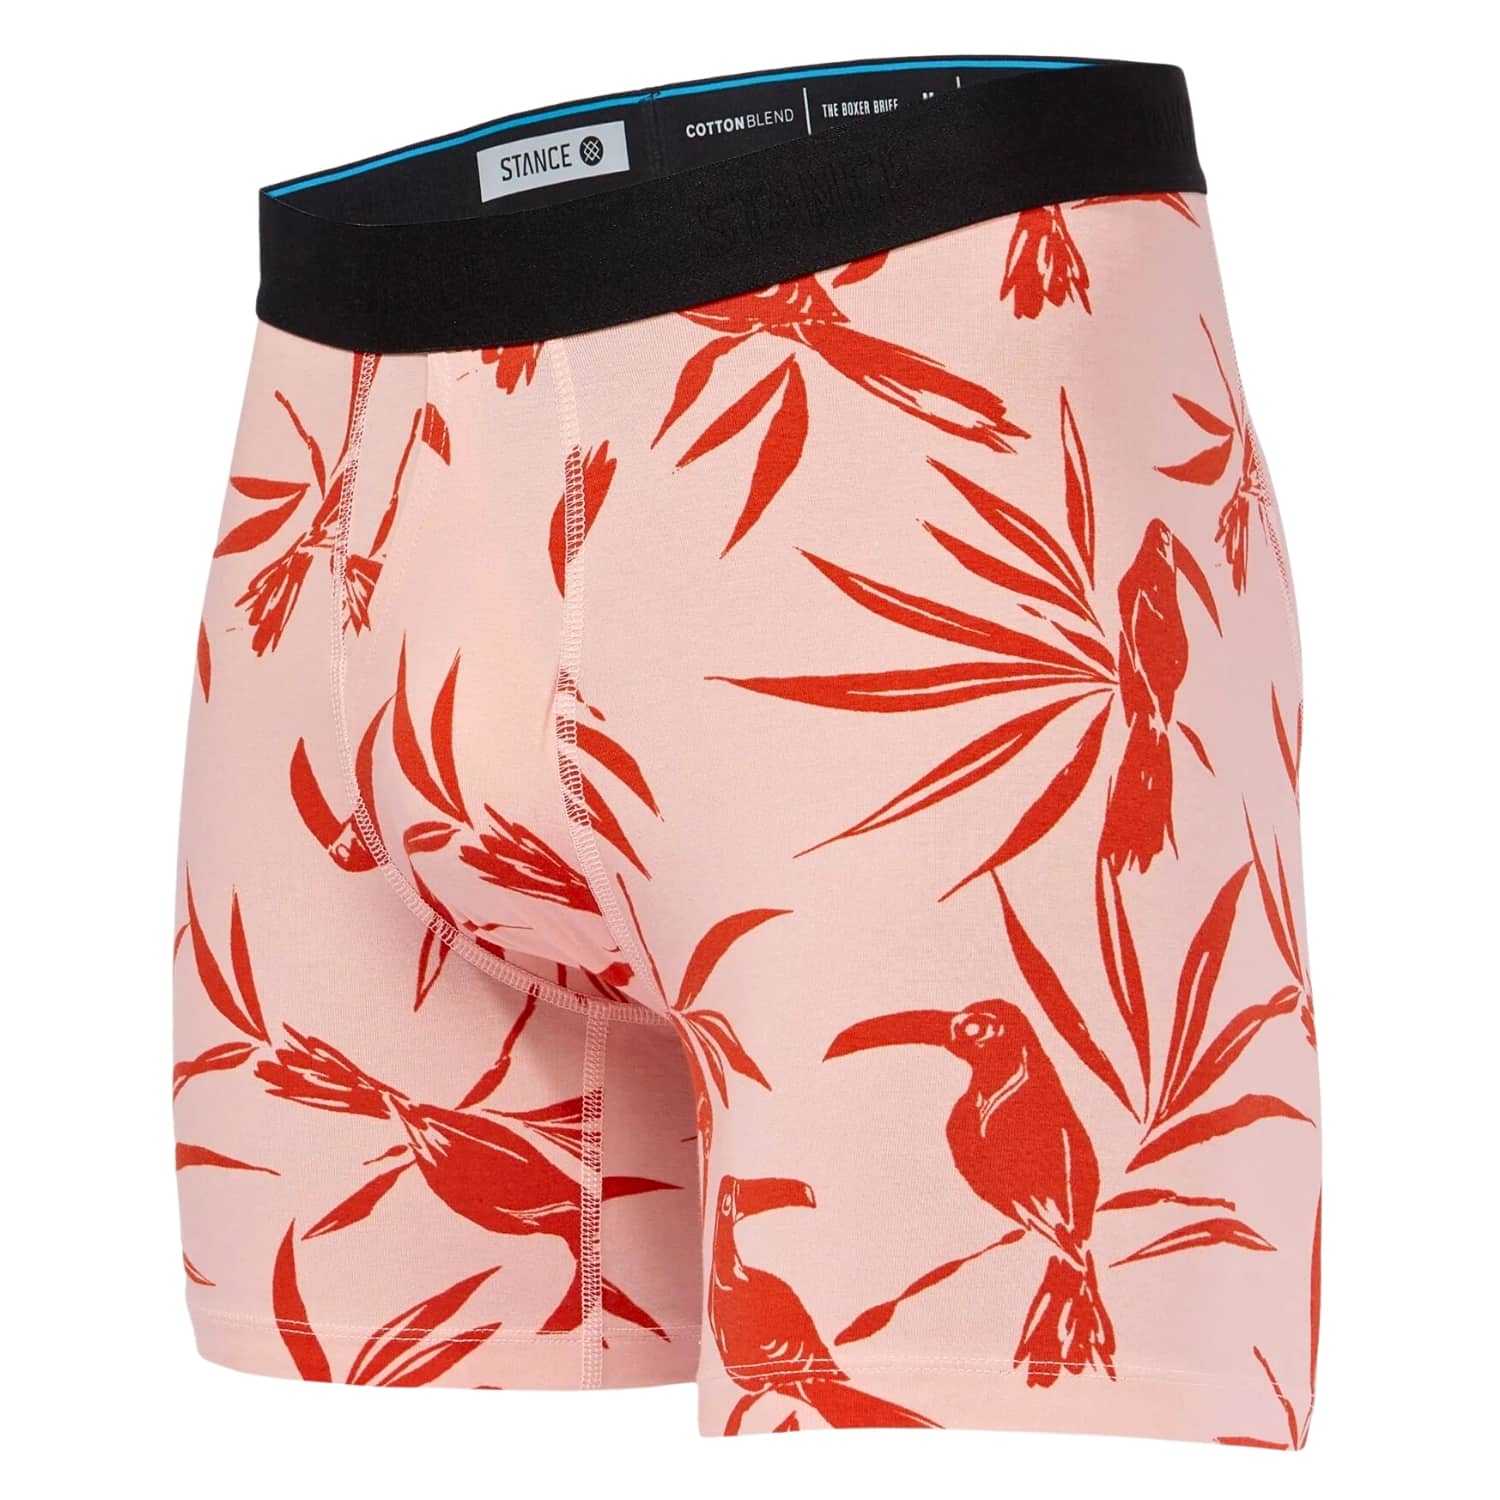 Stance Atrium Boxer Brief - Peach  Free UK Delivery Available - Yakwax